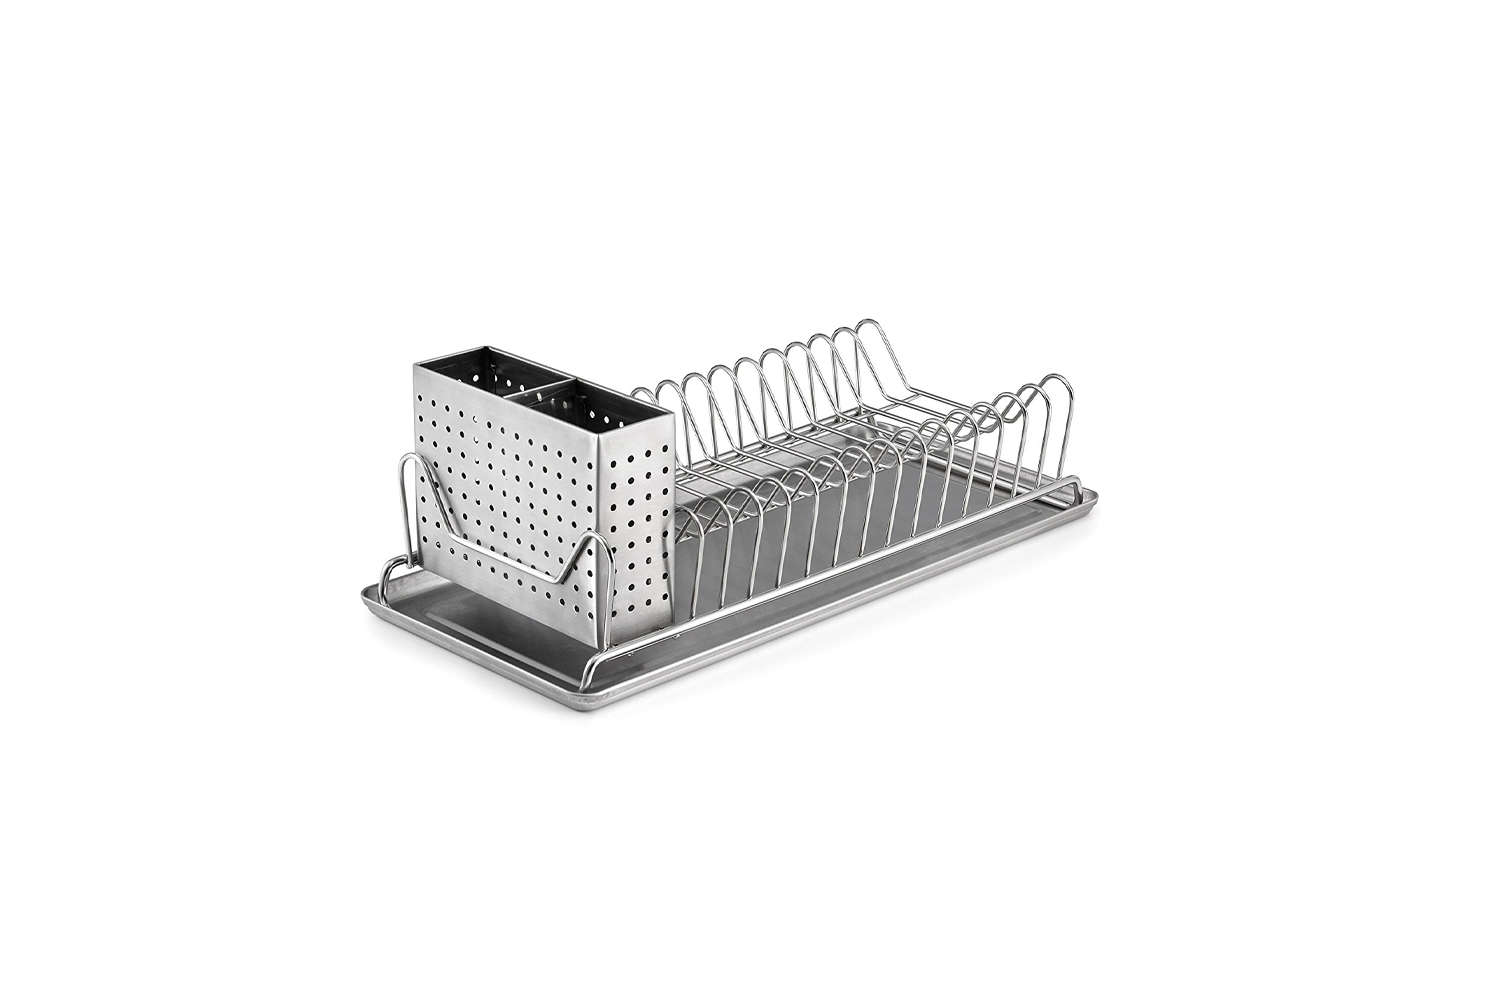 the polder compact stainless steel dish rack with utensil holder is \$\29.99 at 12